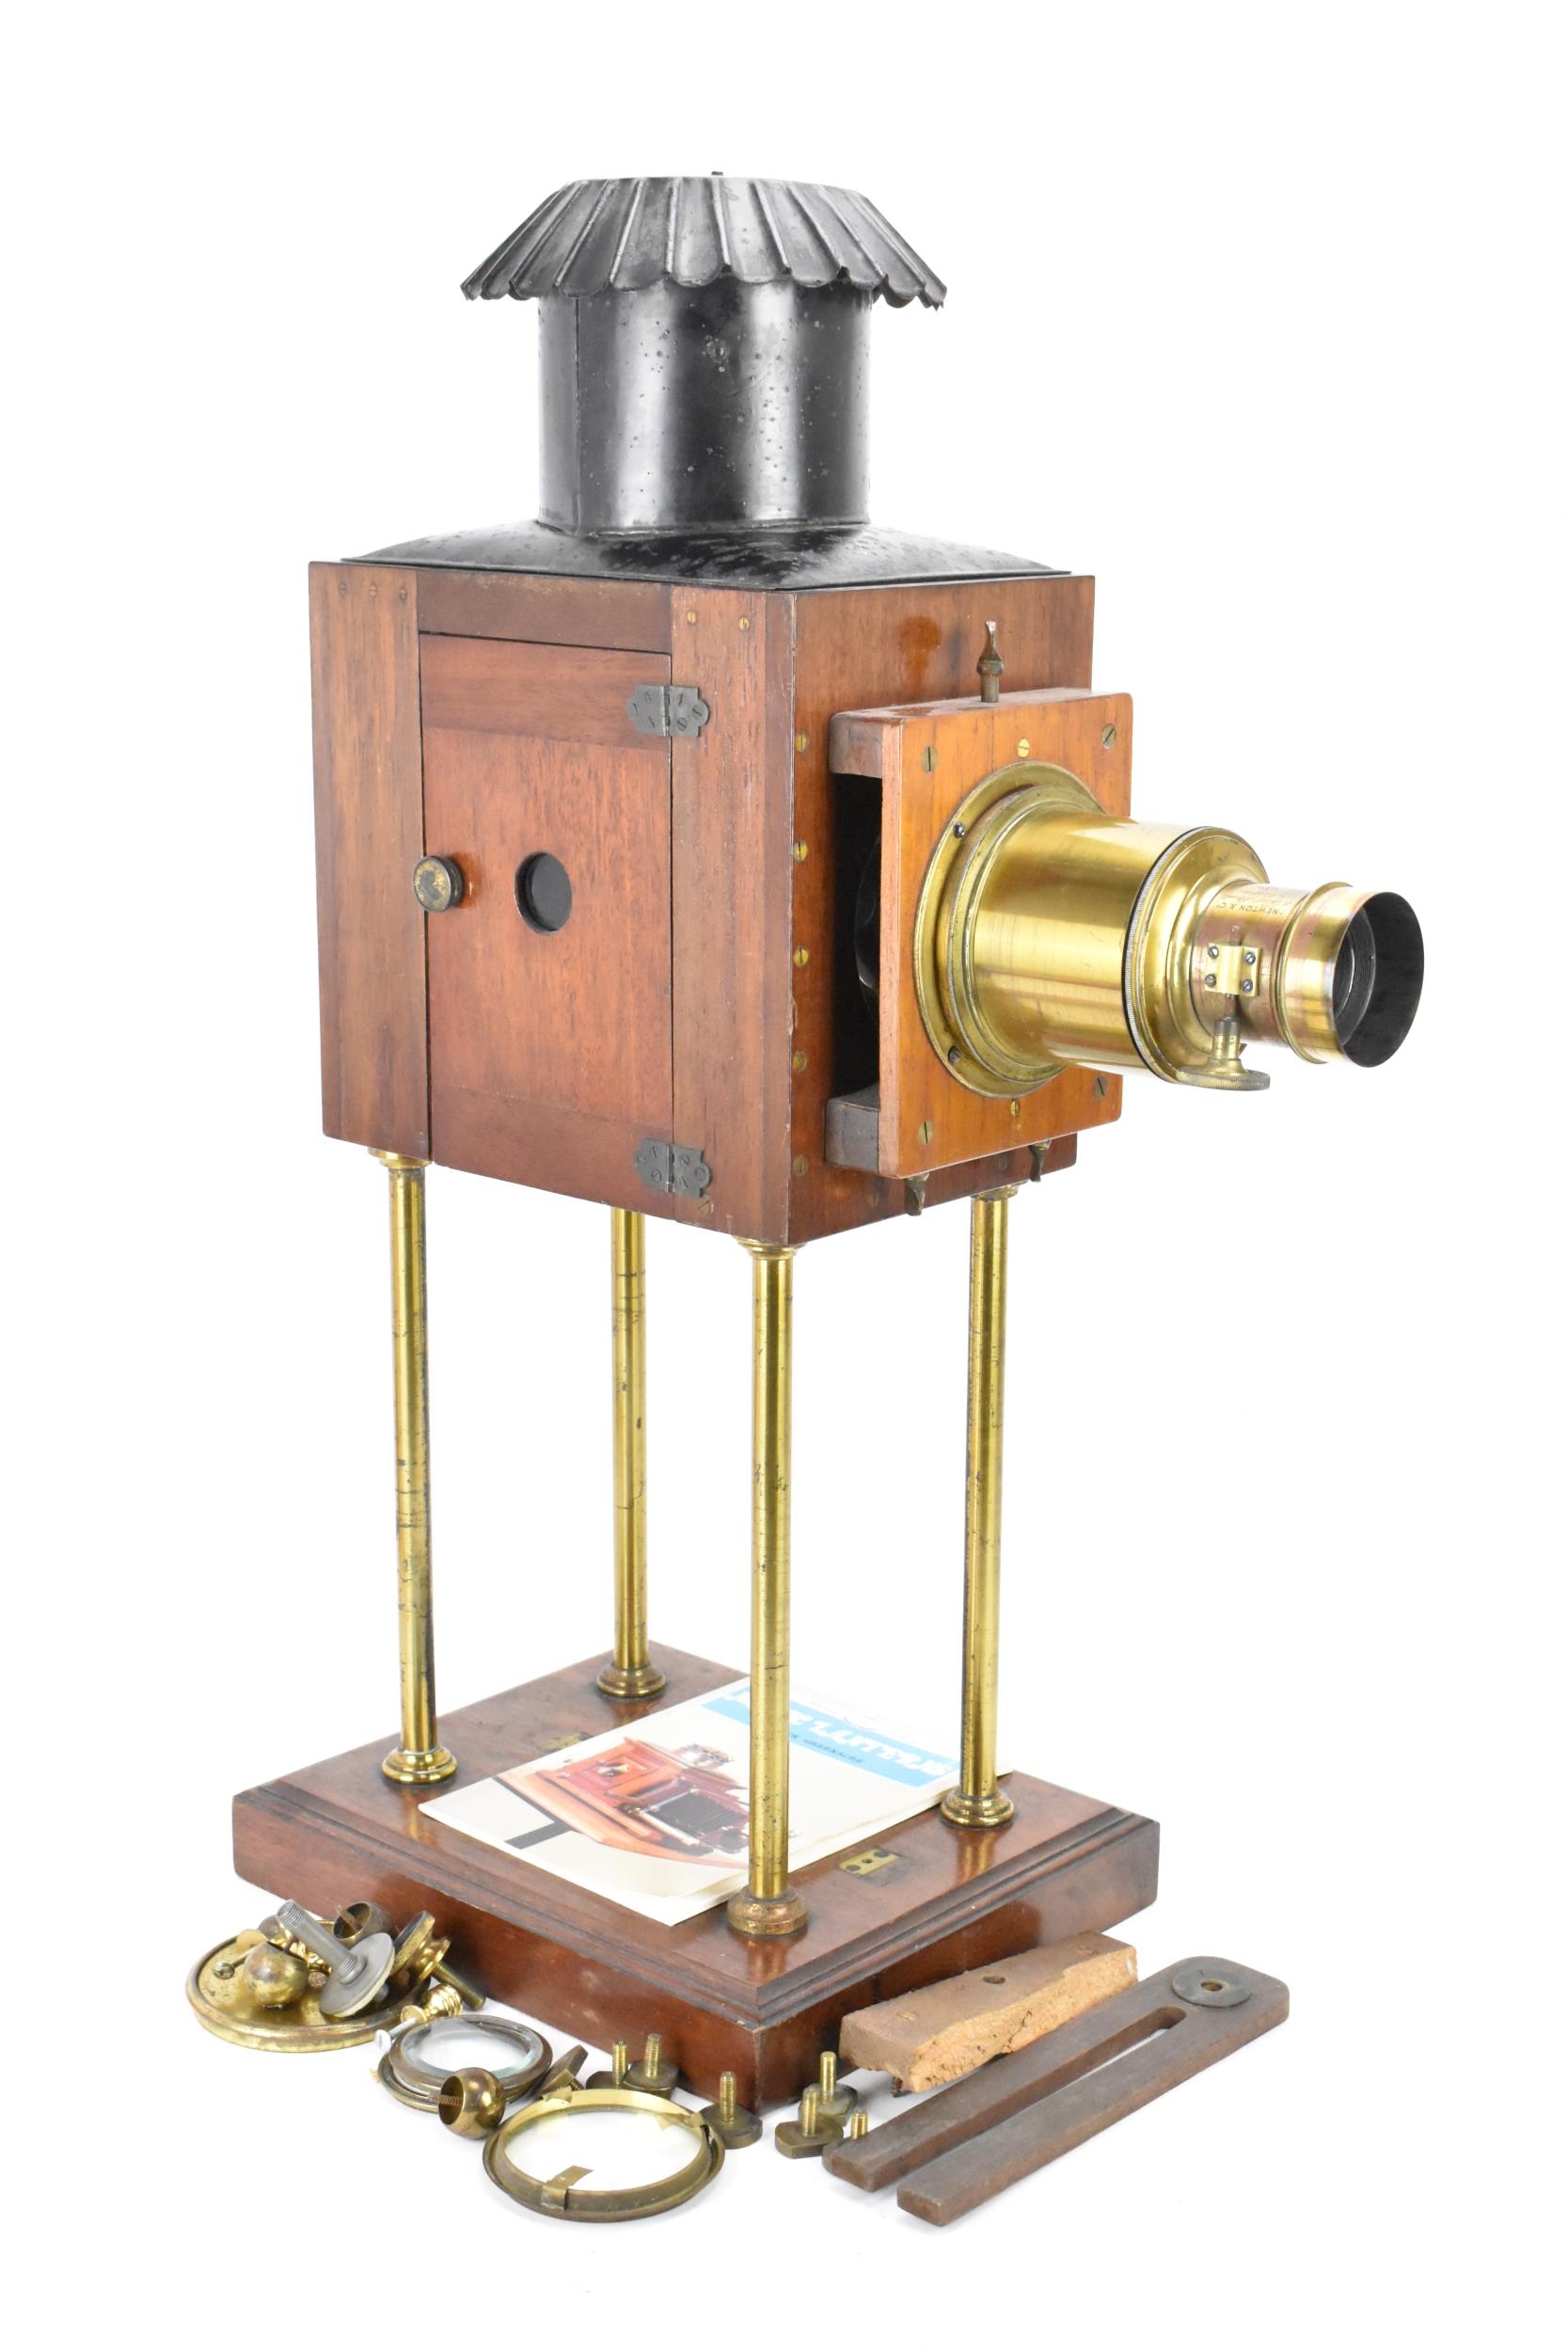 An early 20th century mahogany, brass and lacquered tin Magic Lantern by Newton & Co. 3 Fleet